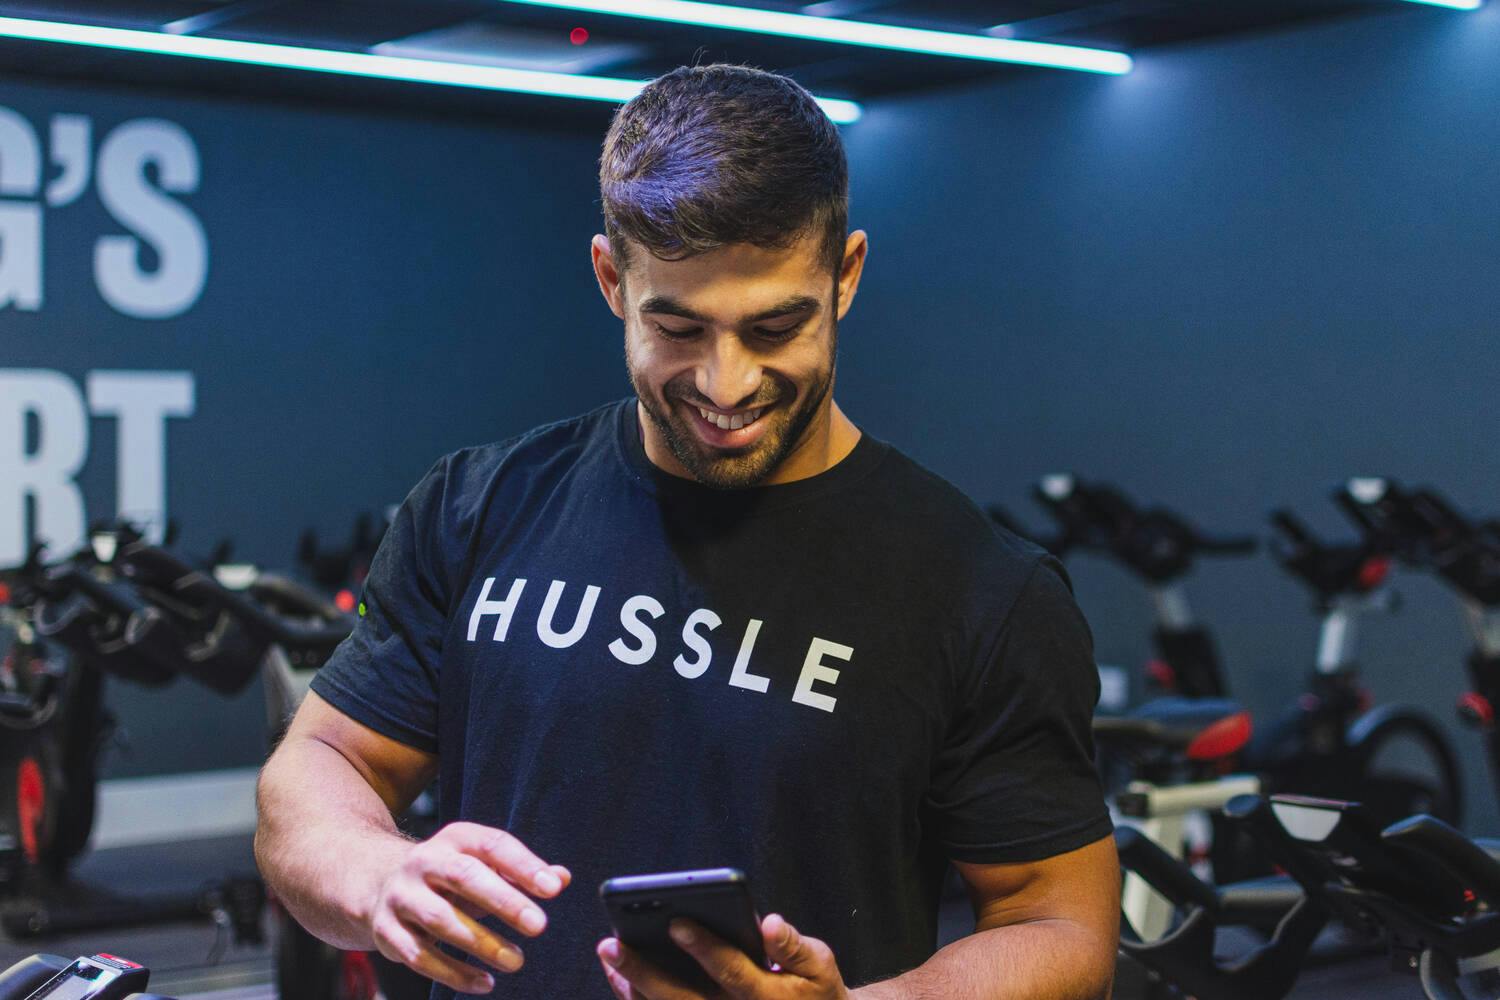 A man in a gym checking out the Hussle blog on their smartphone.